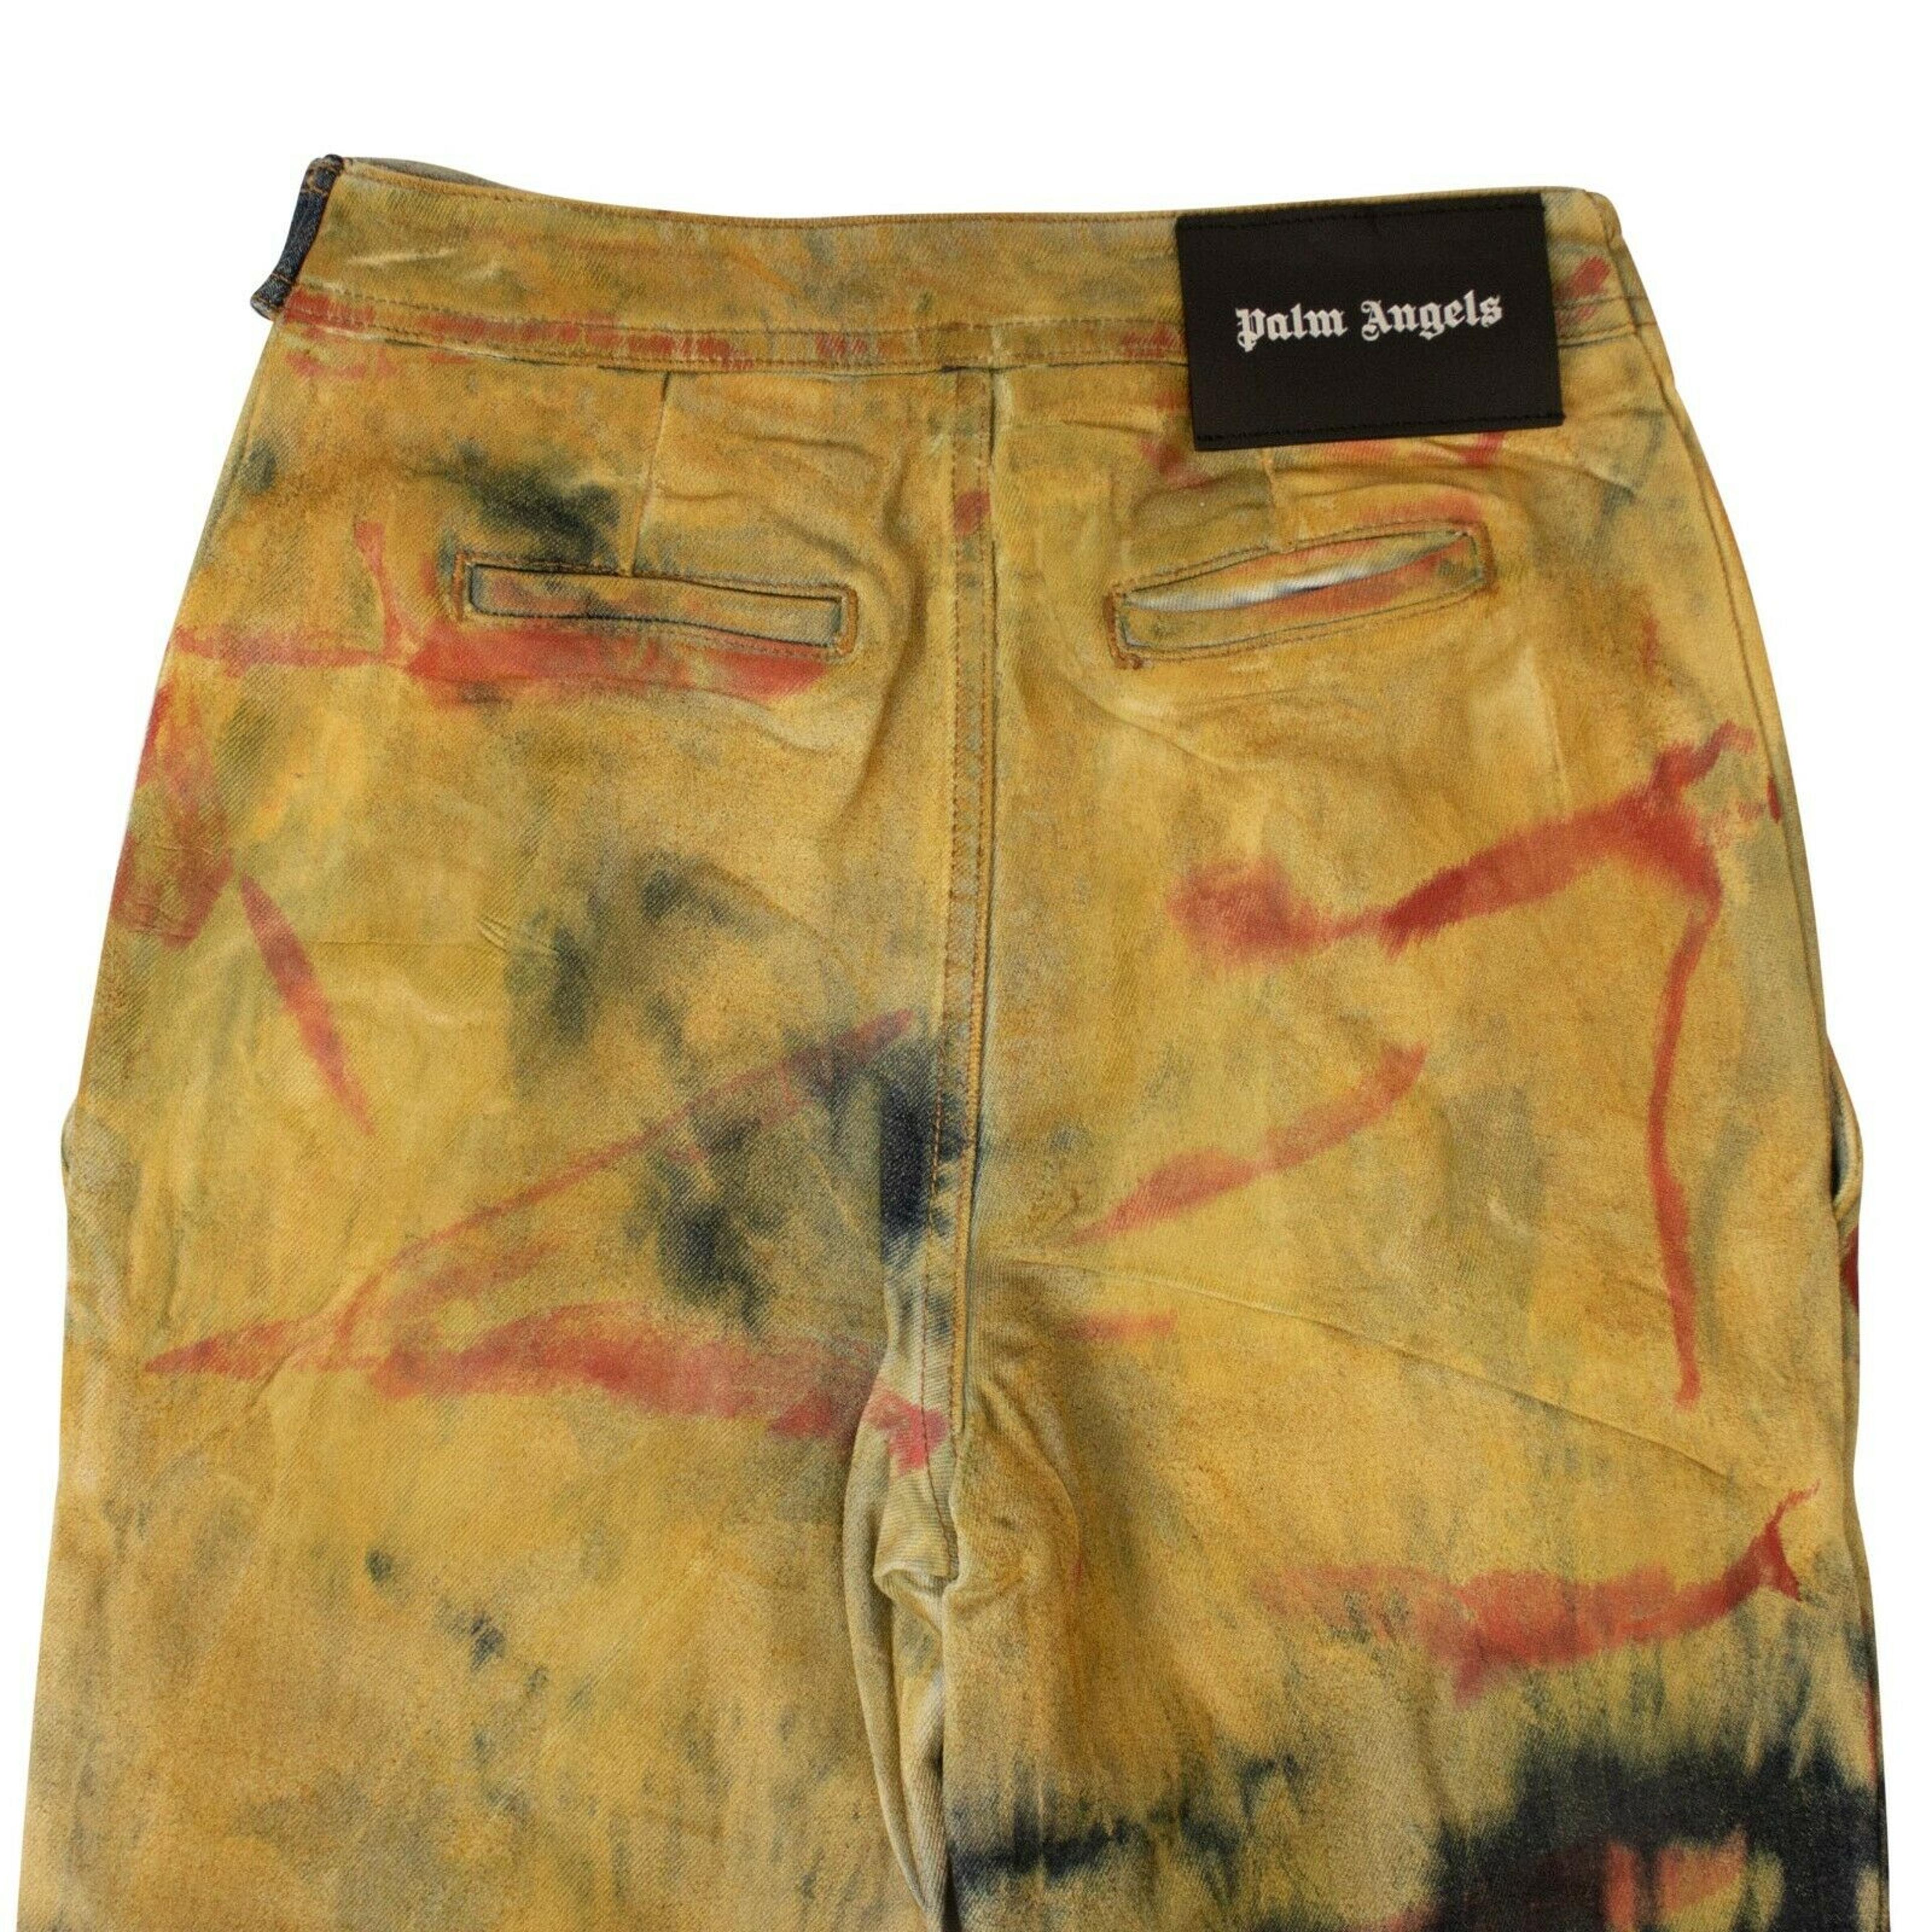 Alternate View 3 of Palm Angels Tie Dye Jeans Pants - Yellow